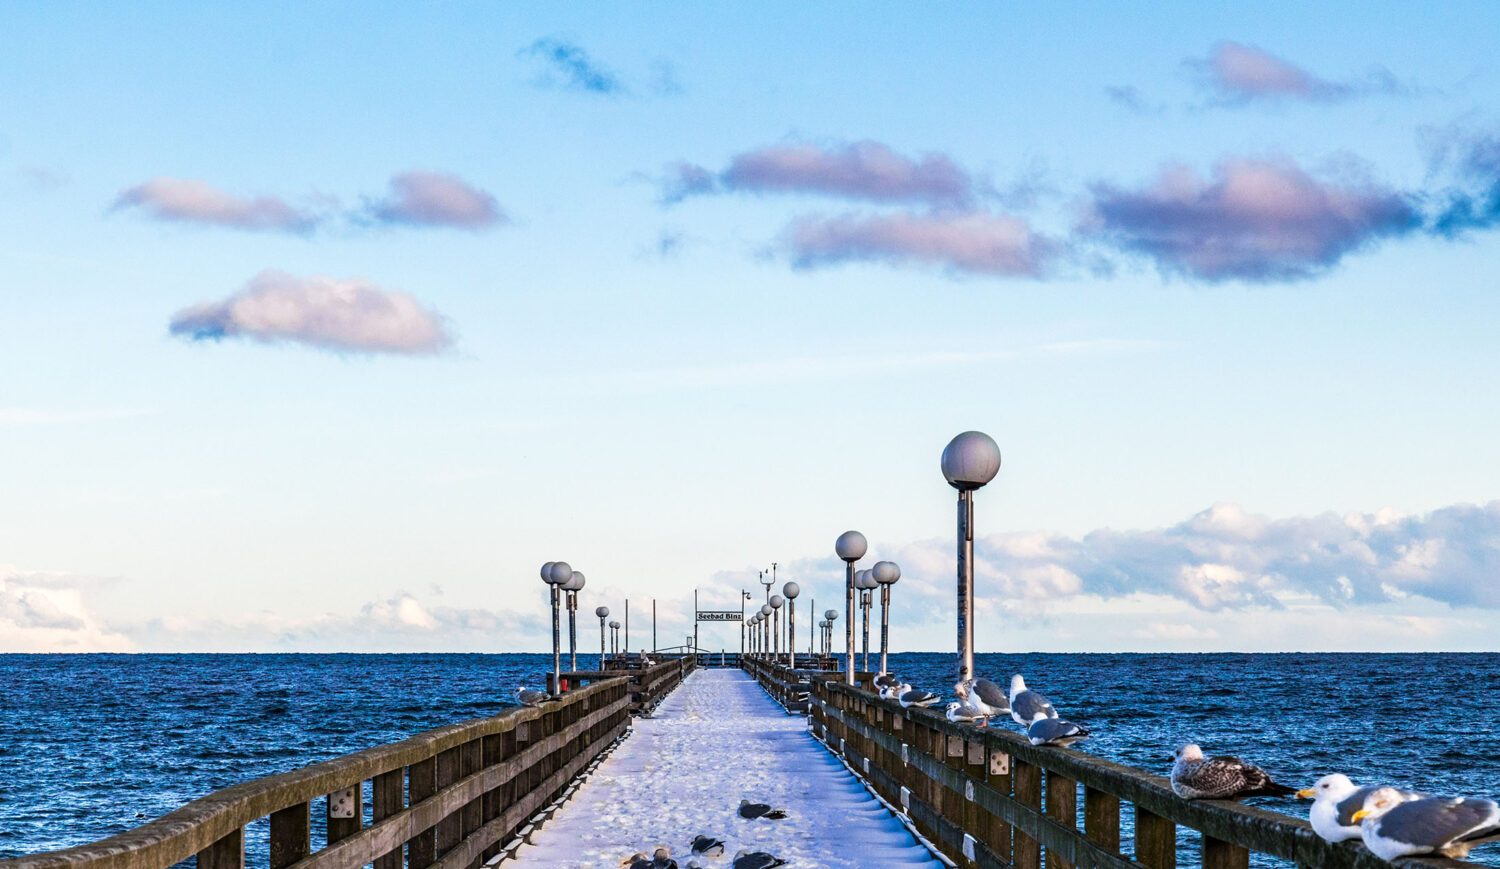 The seagulls are already waiting - the pier of Binz in winter